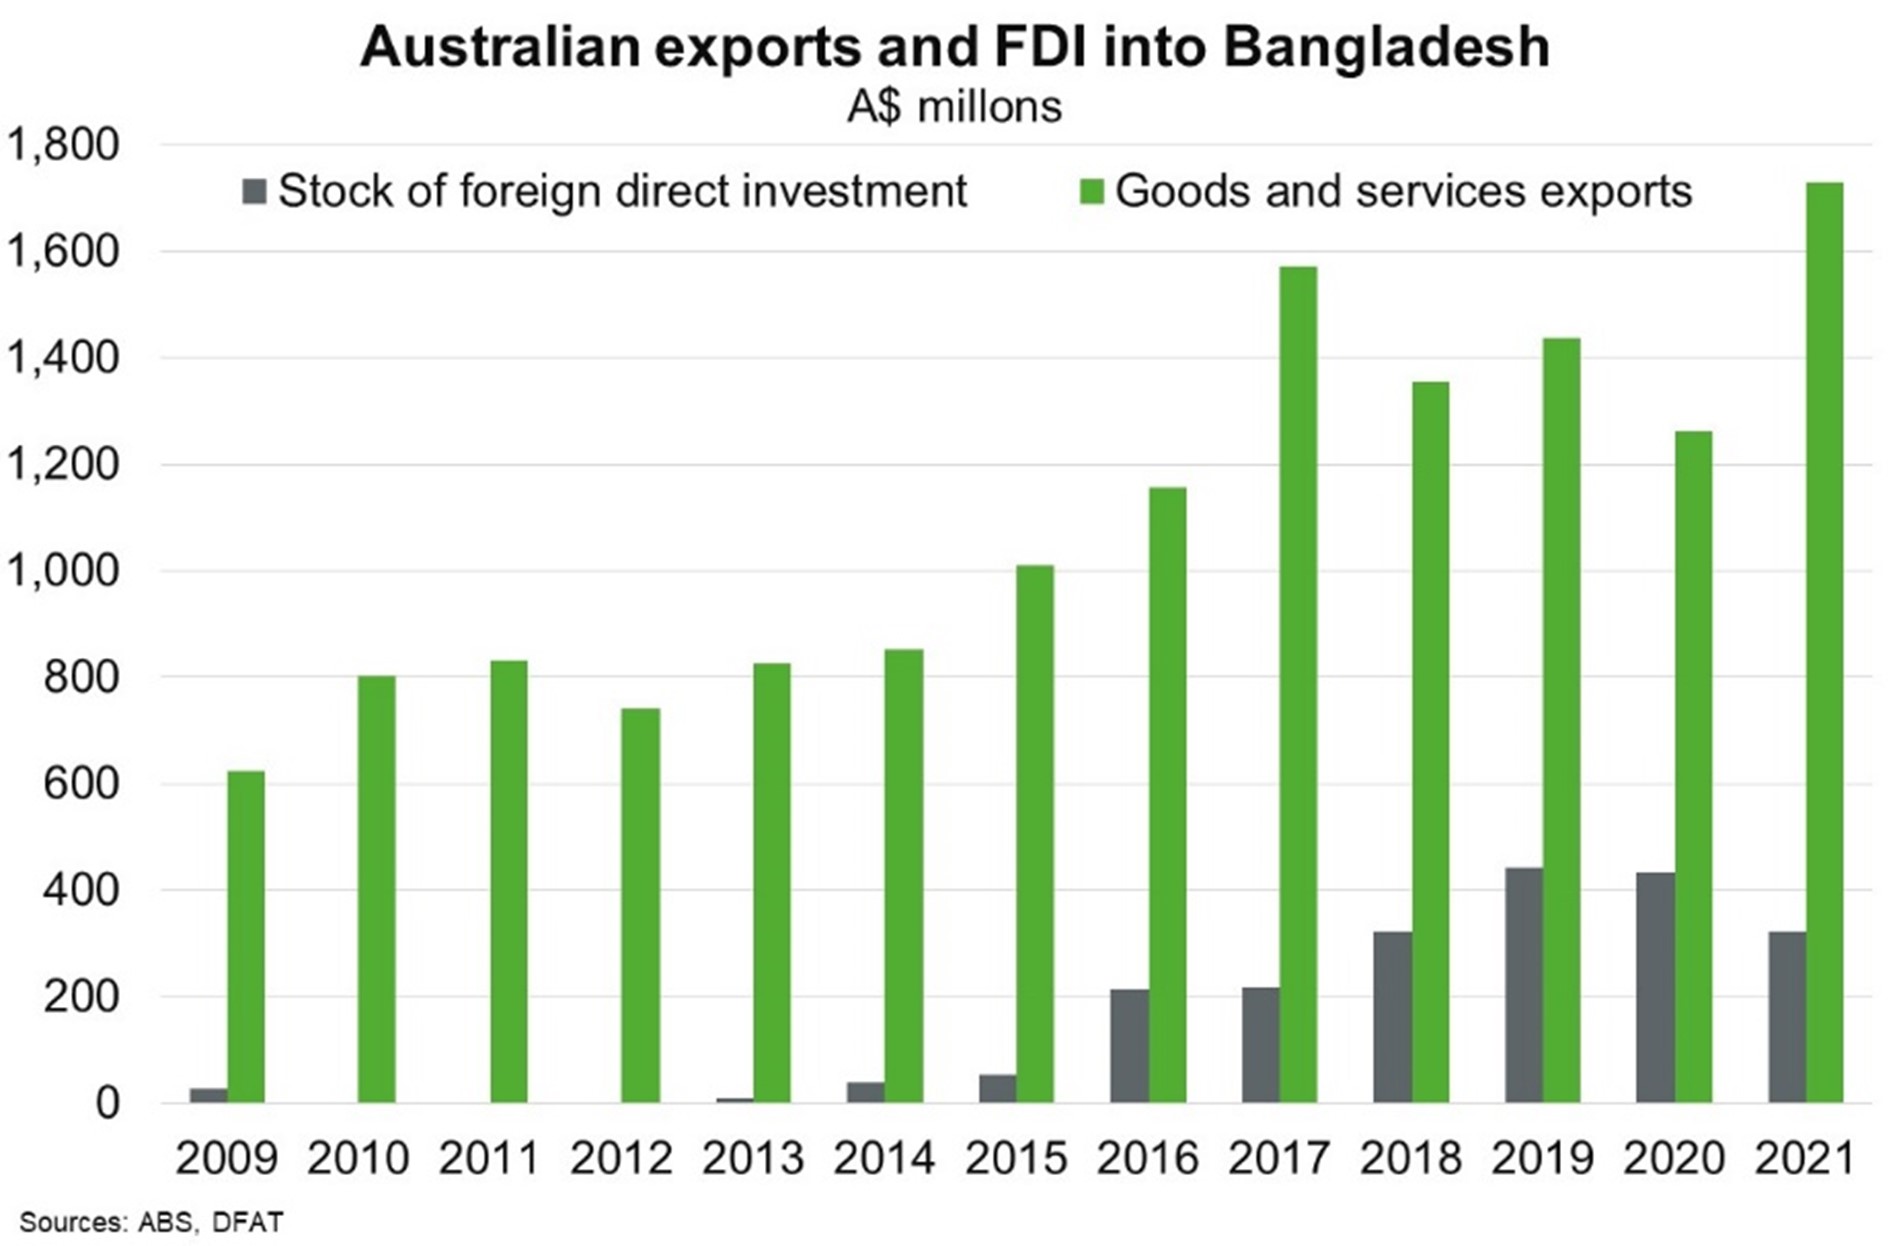 Chart shows column graph of Australian exports and FDI into Bangladesh in a$ millions. Includes Stock foreign investment and goods and services exports. Text above chart discusses.